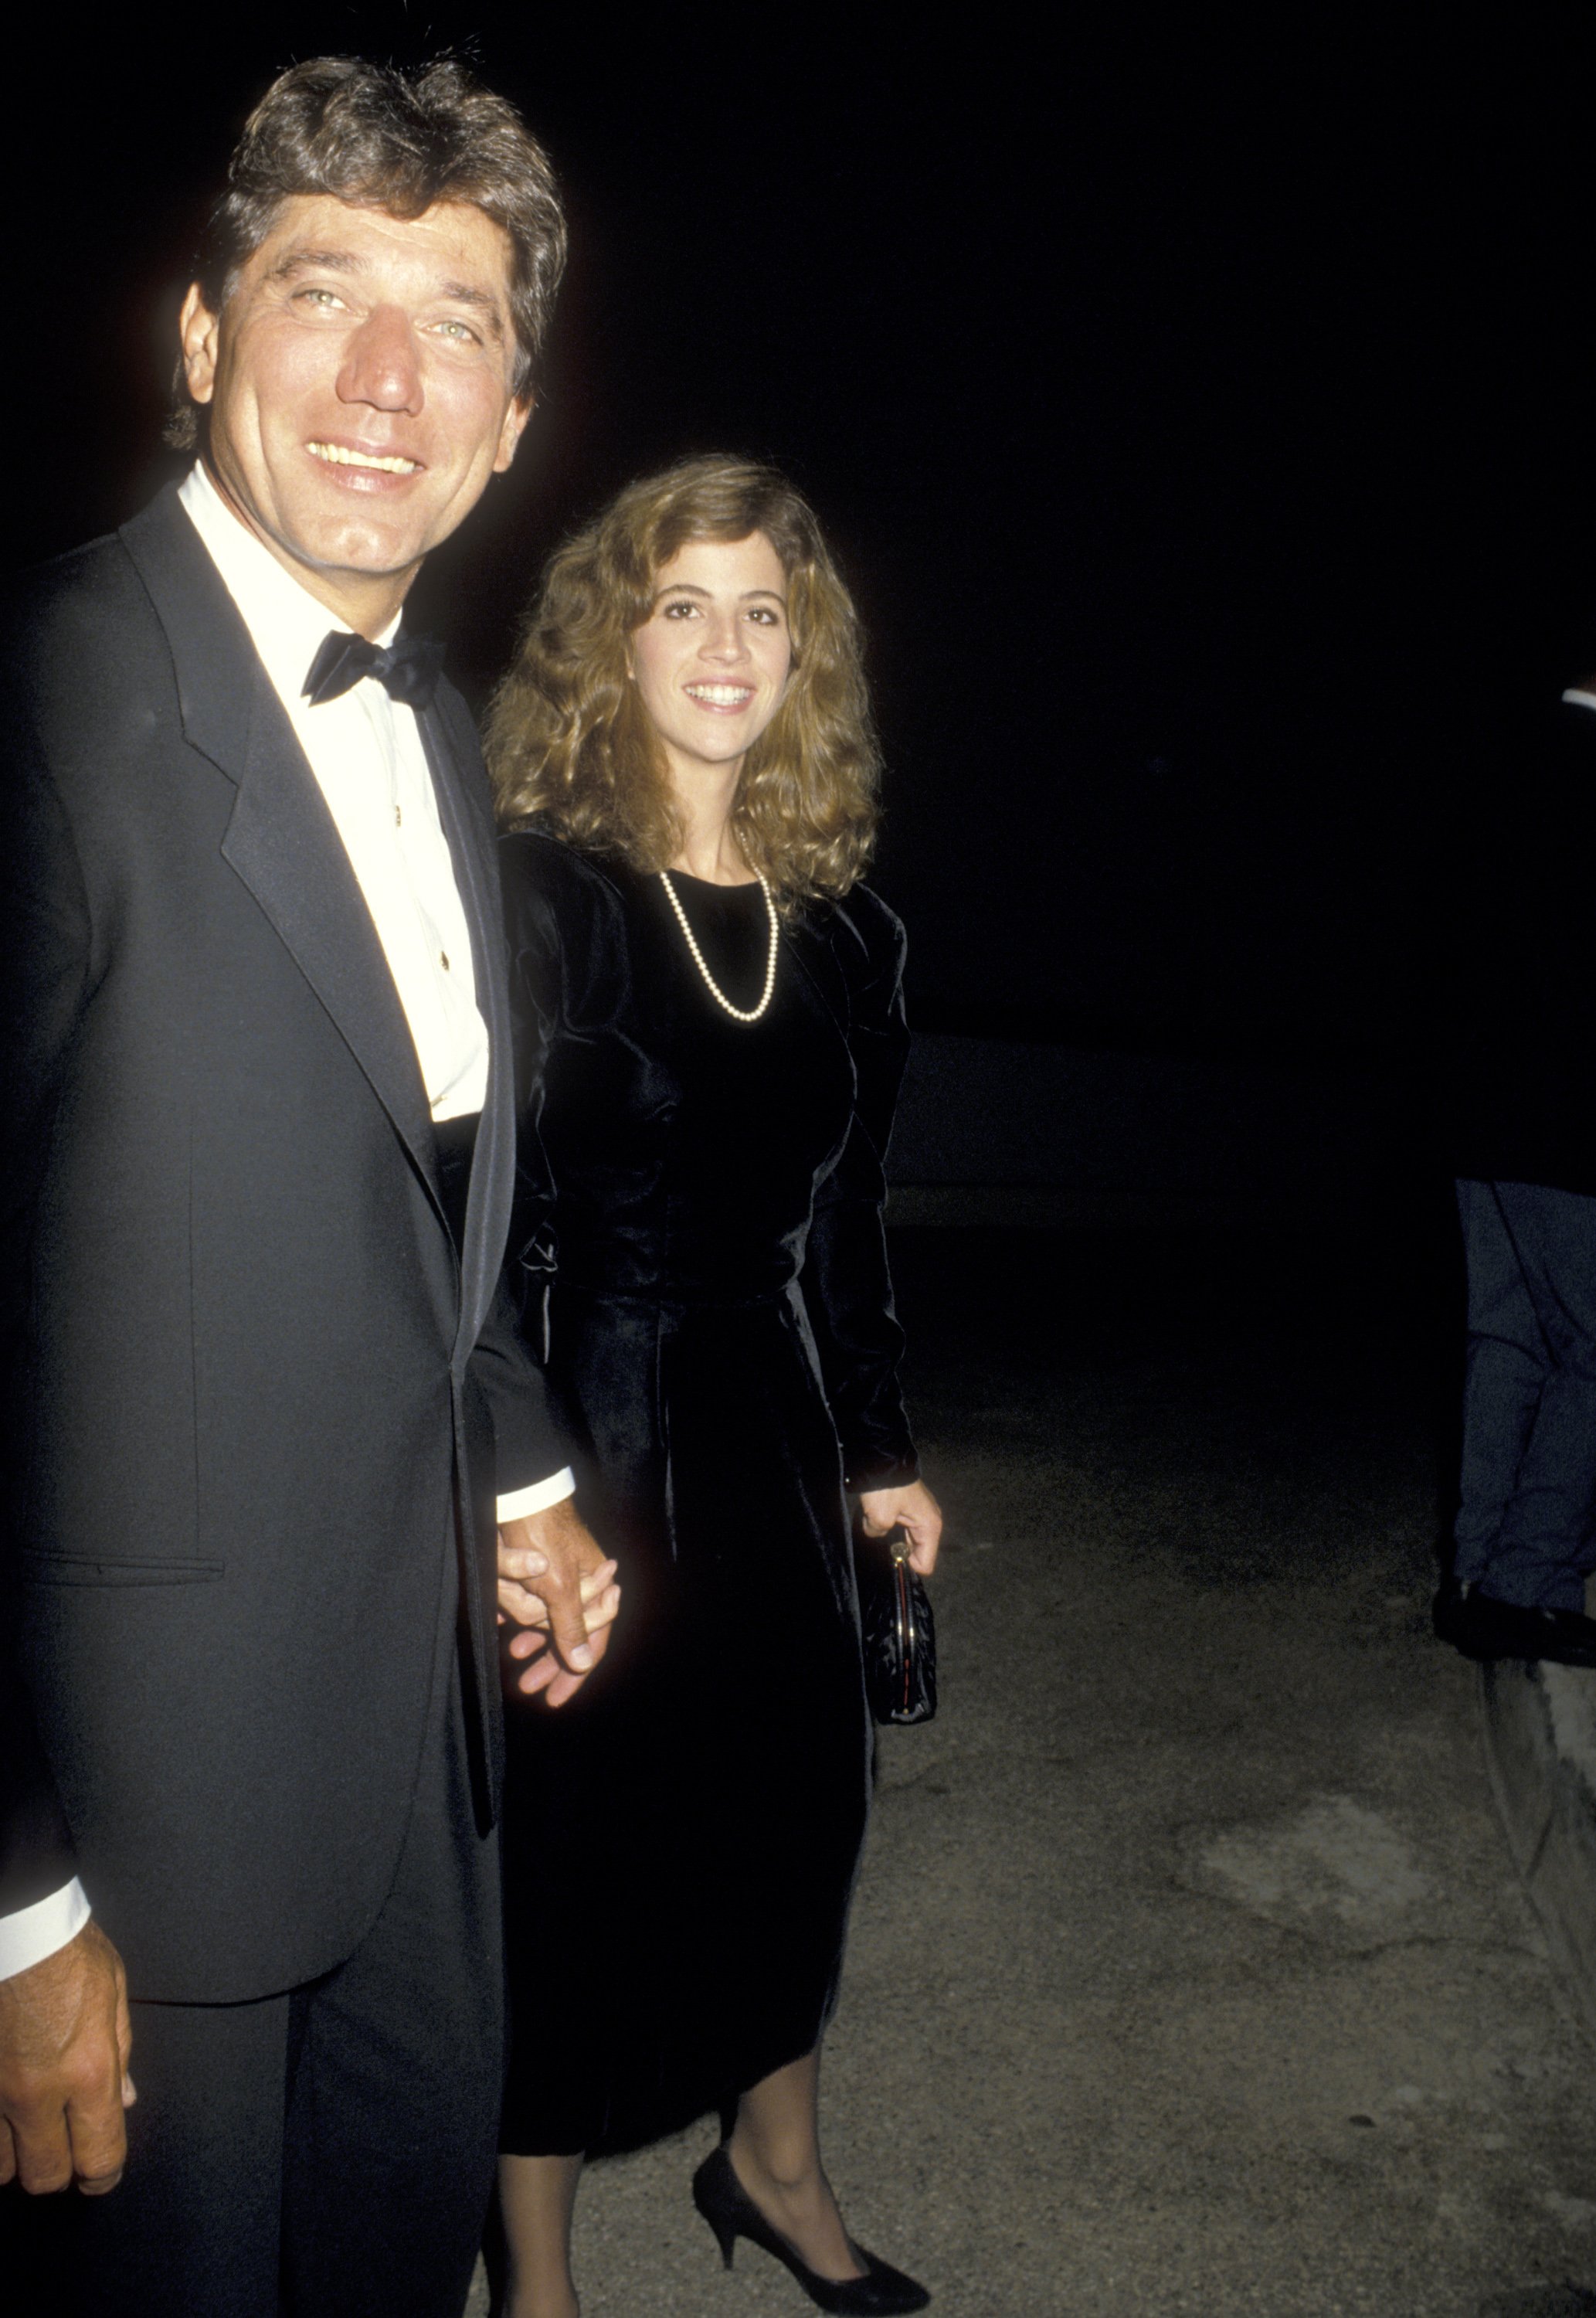 Joe Namath and ex-wife Deborah Mays on September 19, 1986, at Wiltern Theatre in Los Angeles, California. | Source: Getty Images